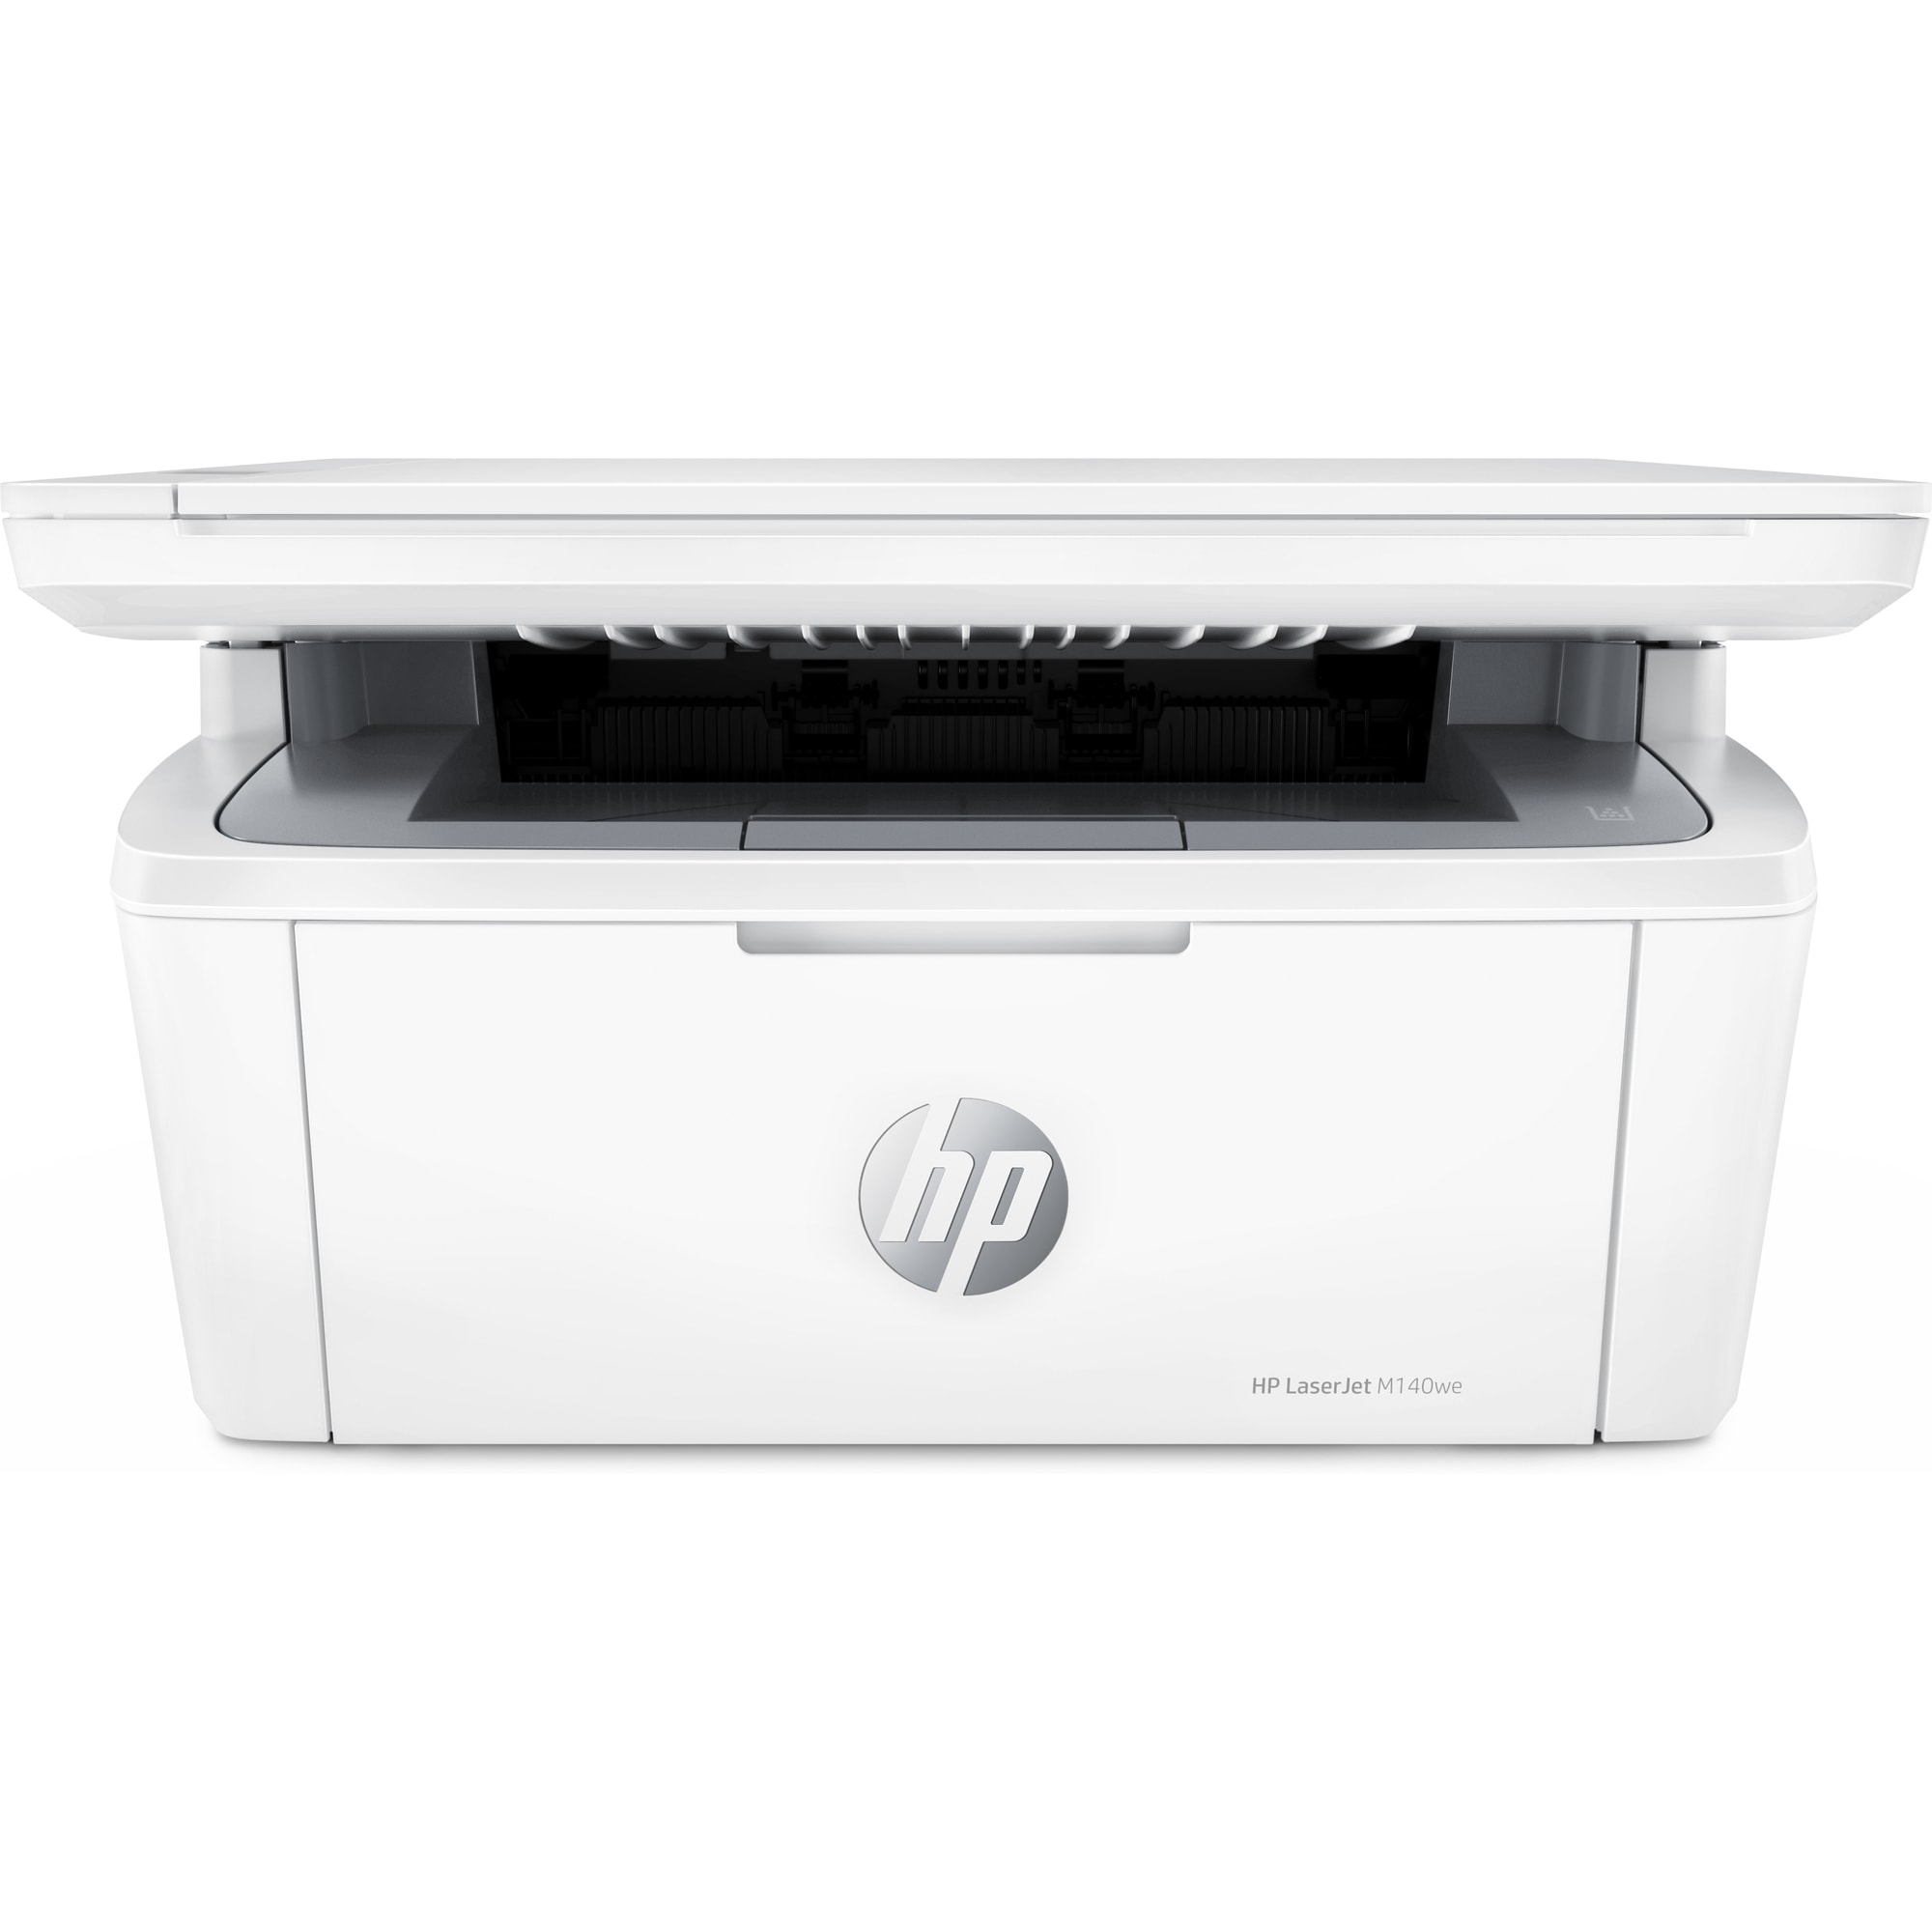 HP LaserJet MFP M140we Wireless Laser All-In-One Monochrome Printer with HP+ (7MD72E) - image 1 of 7